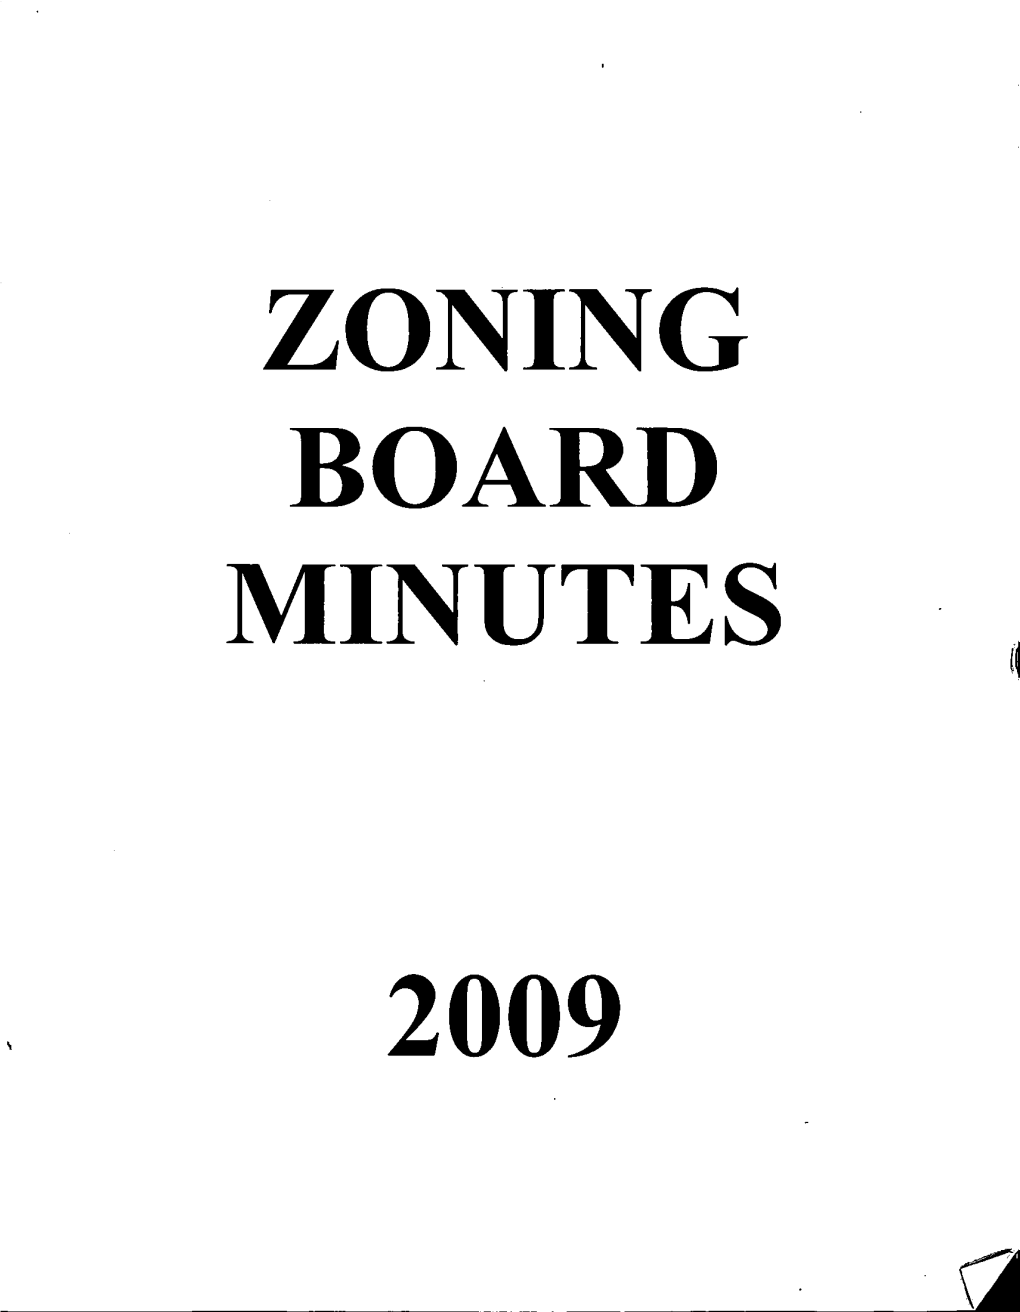 Zoning Board Minutes 2009